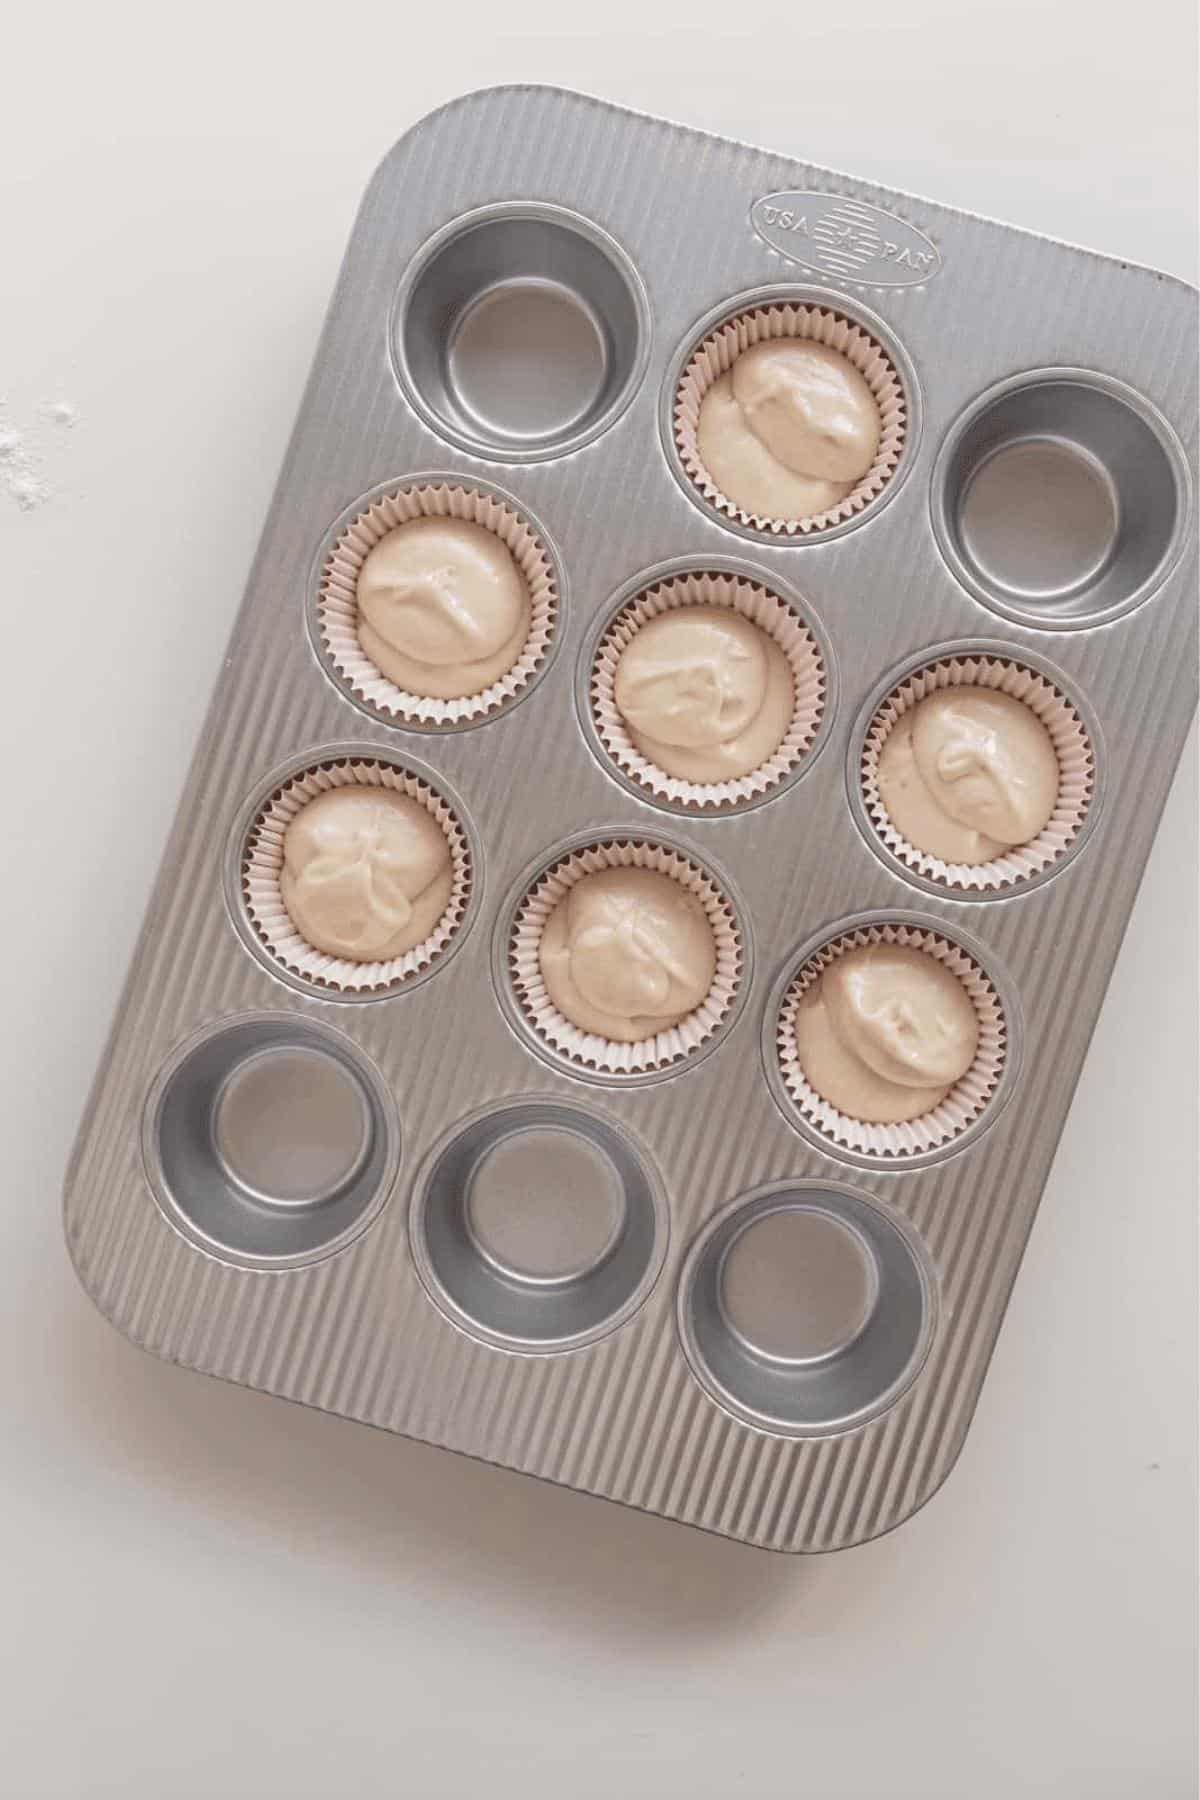 7 vanilla cupcakes in tin with water in 5 empty wells